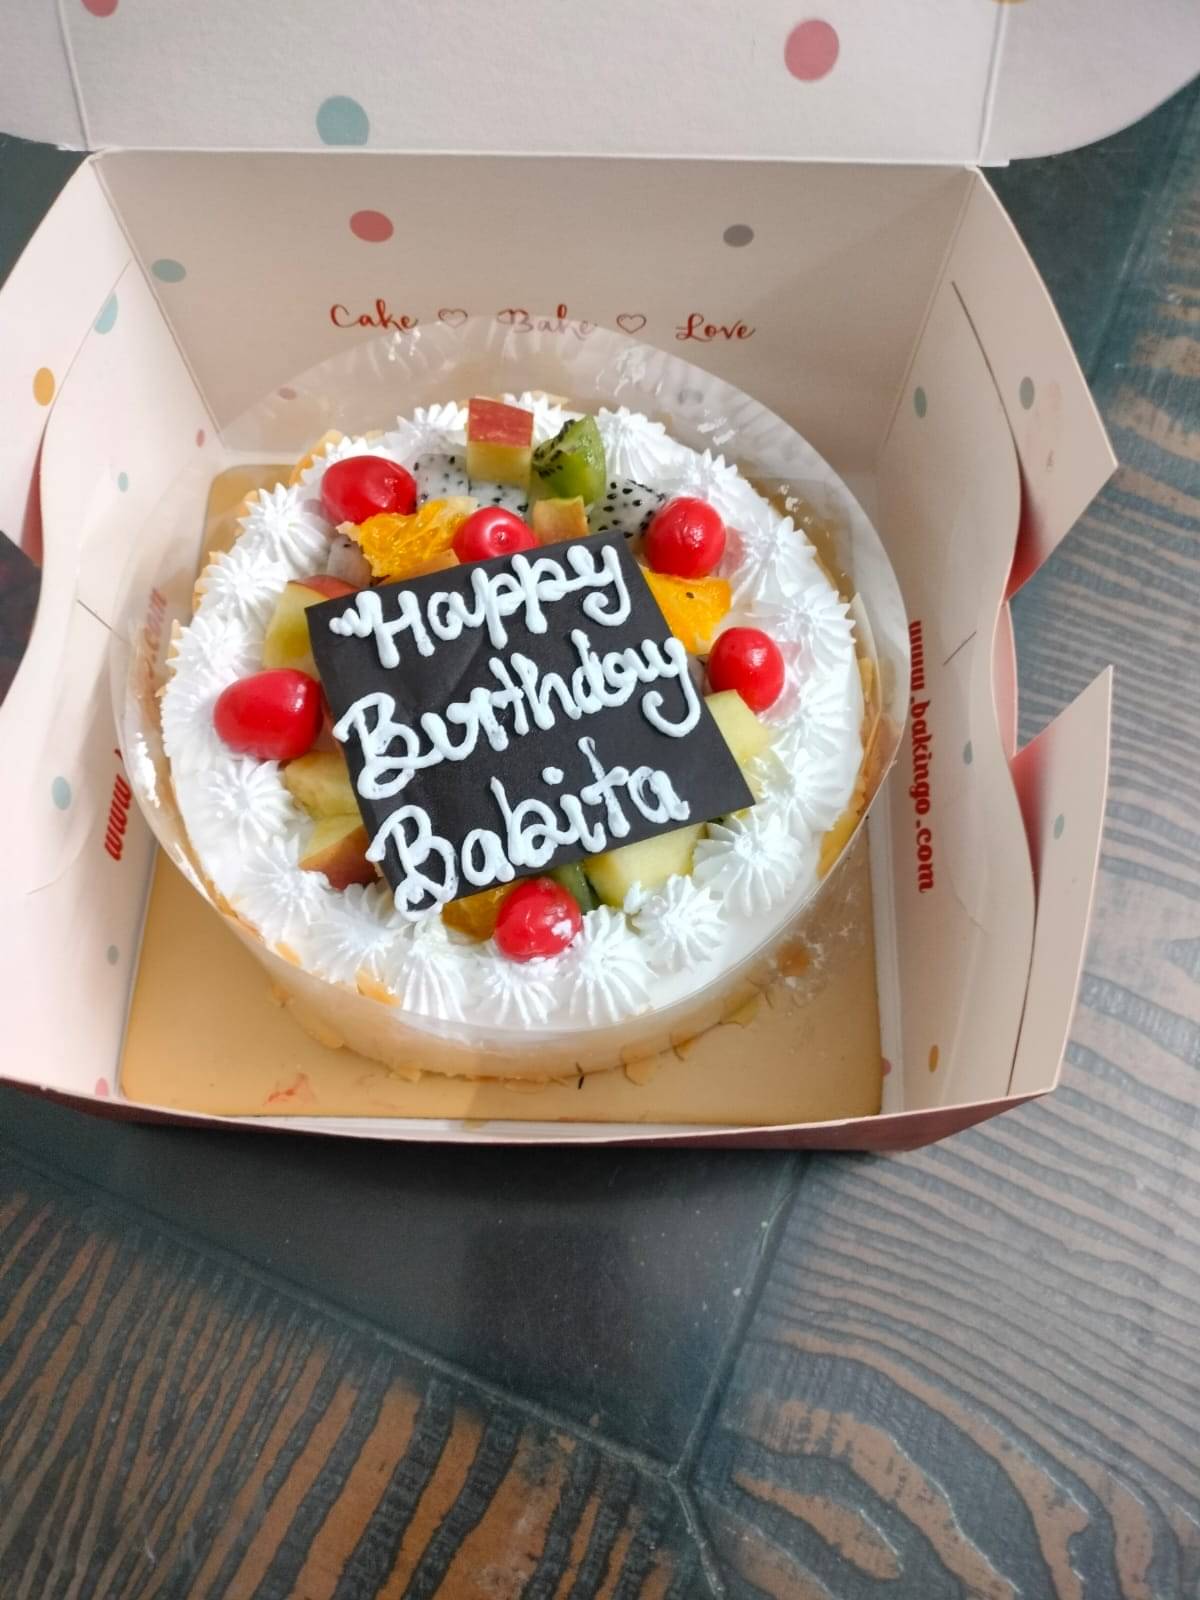 Bake the cake - This cake was ordered by Babita Sharma to gift her son on  his bday | Facebook